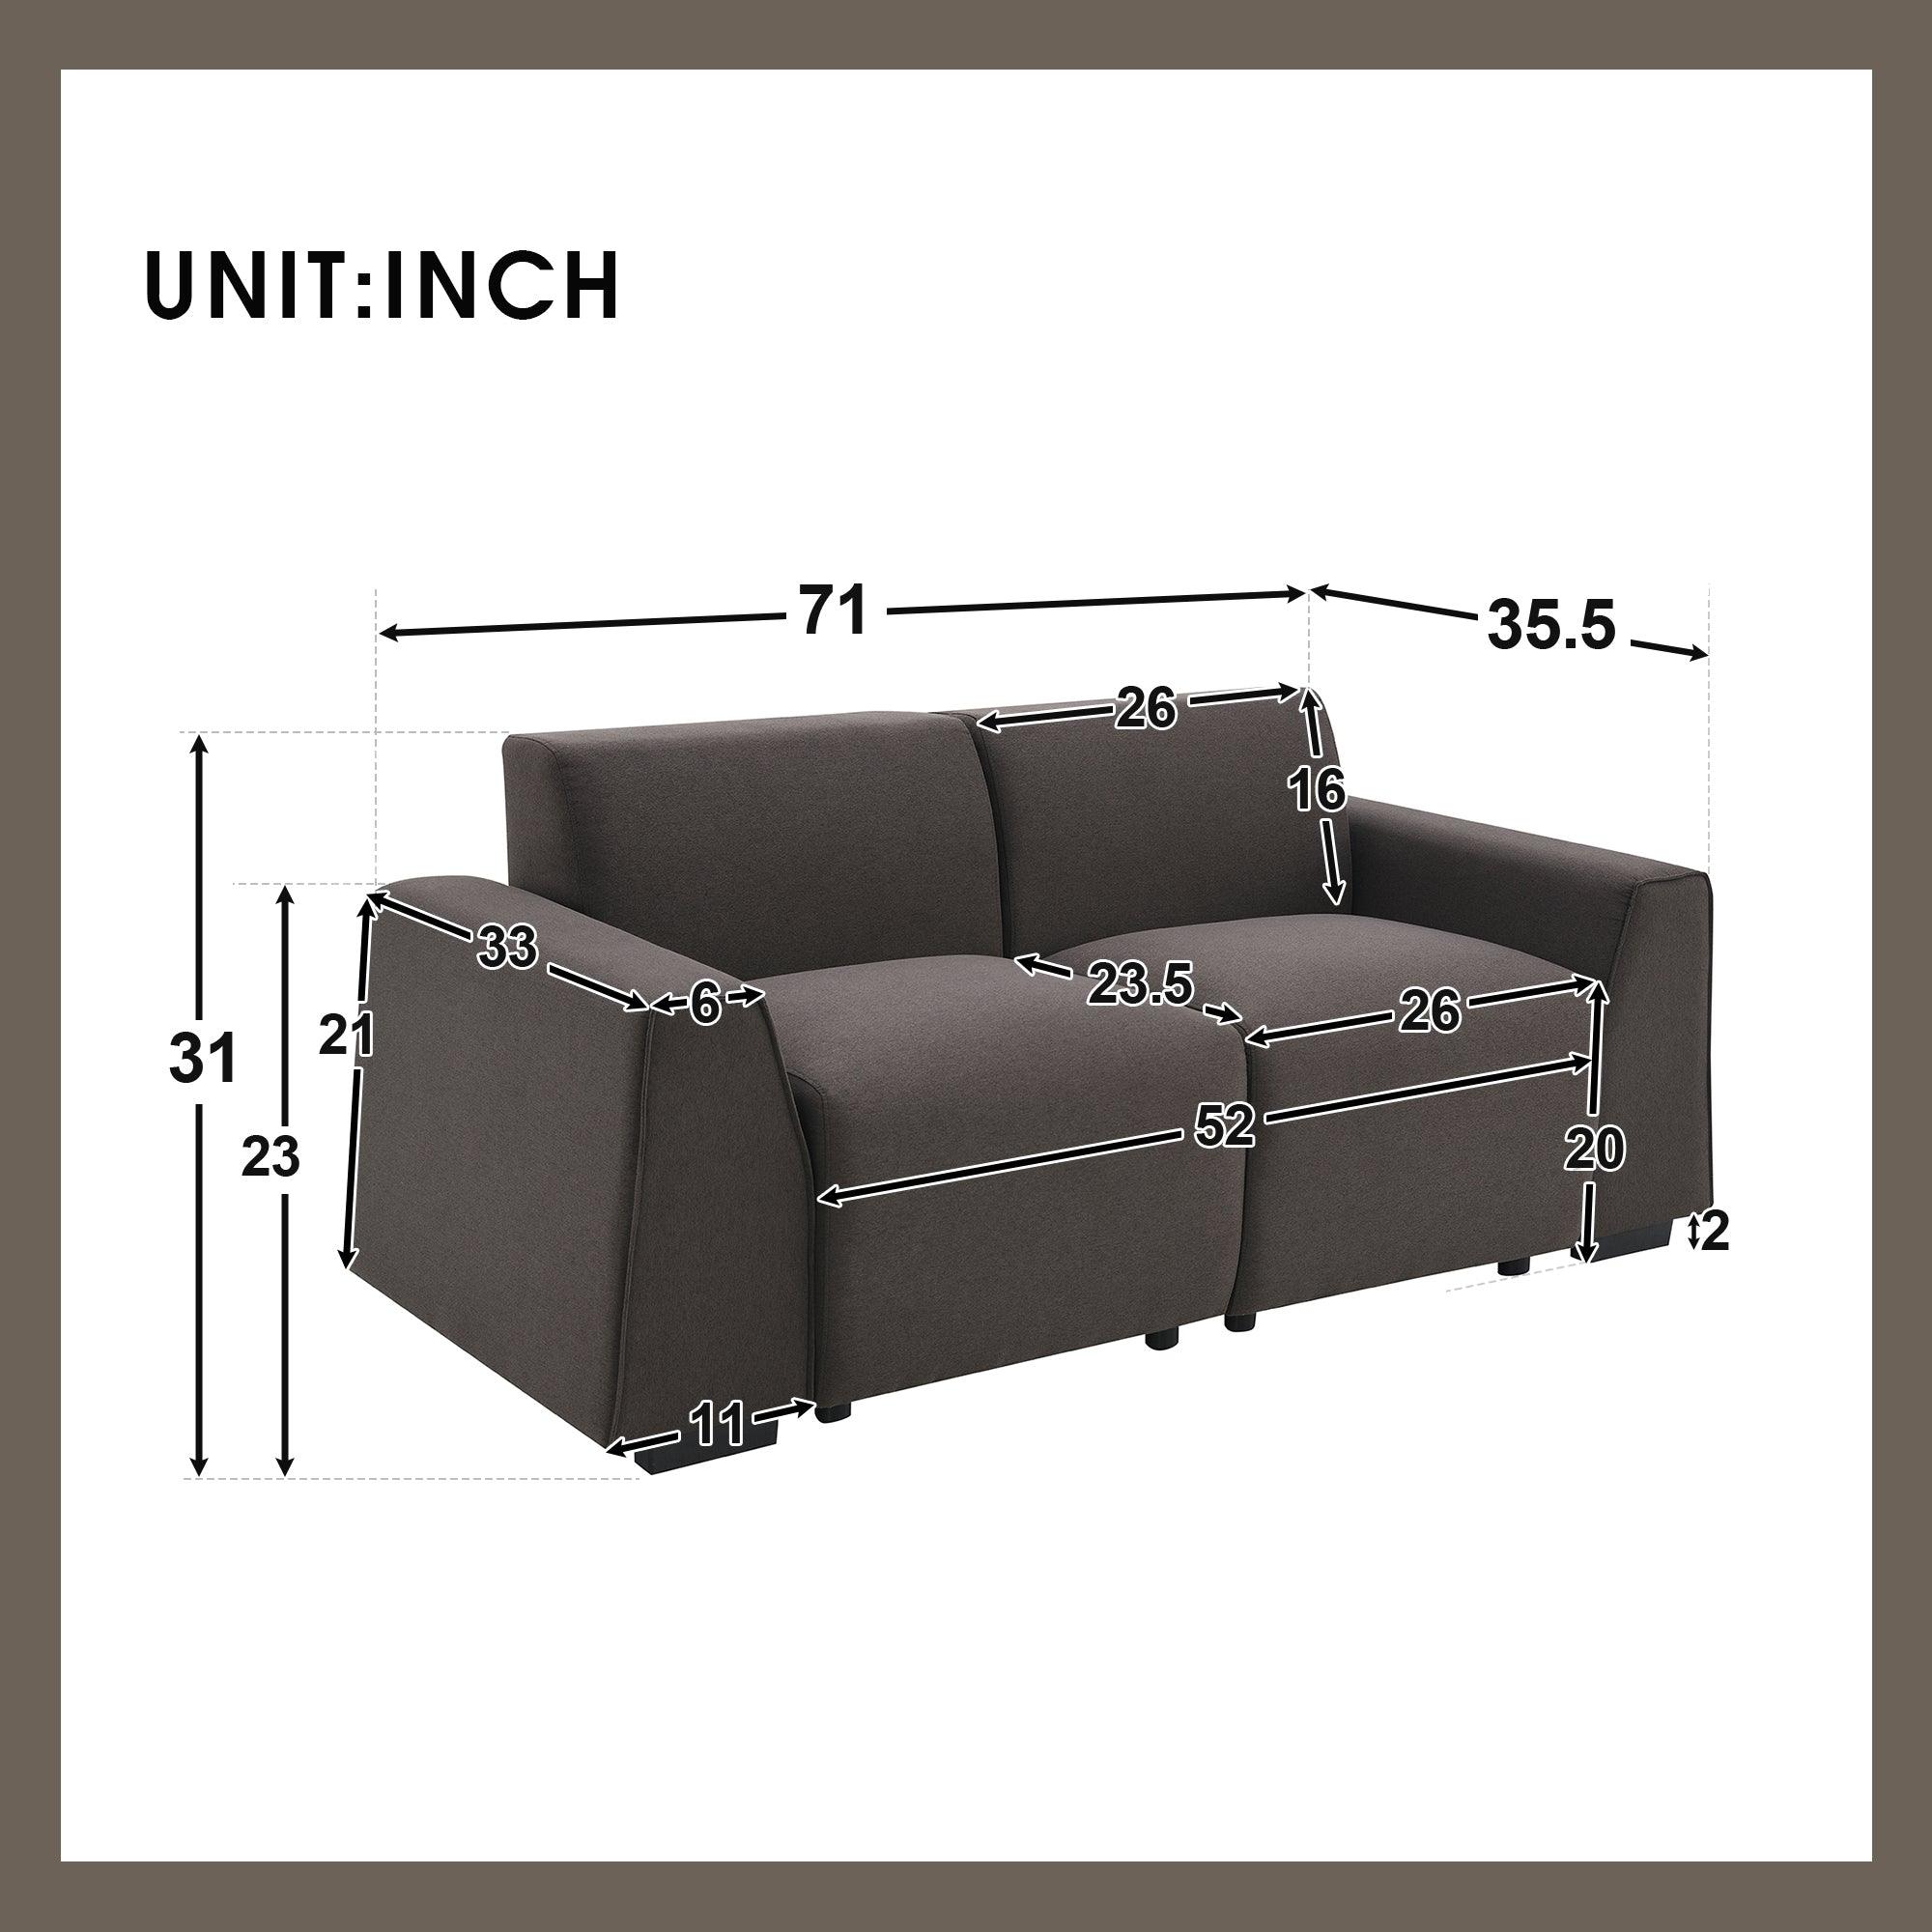 71*35.5" Modern Linen Fabric Sofa, Stylish And Minimalist 2-3 Seat Couch, Easy To Install, Exquisite Loveseat With Wide Armrests For Living Room, Bedroom, Apartment, Office, 2 Colors